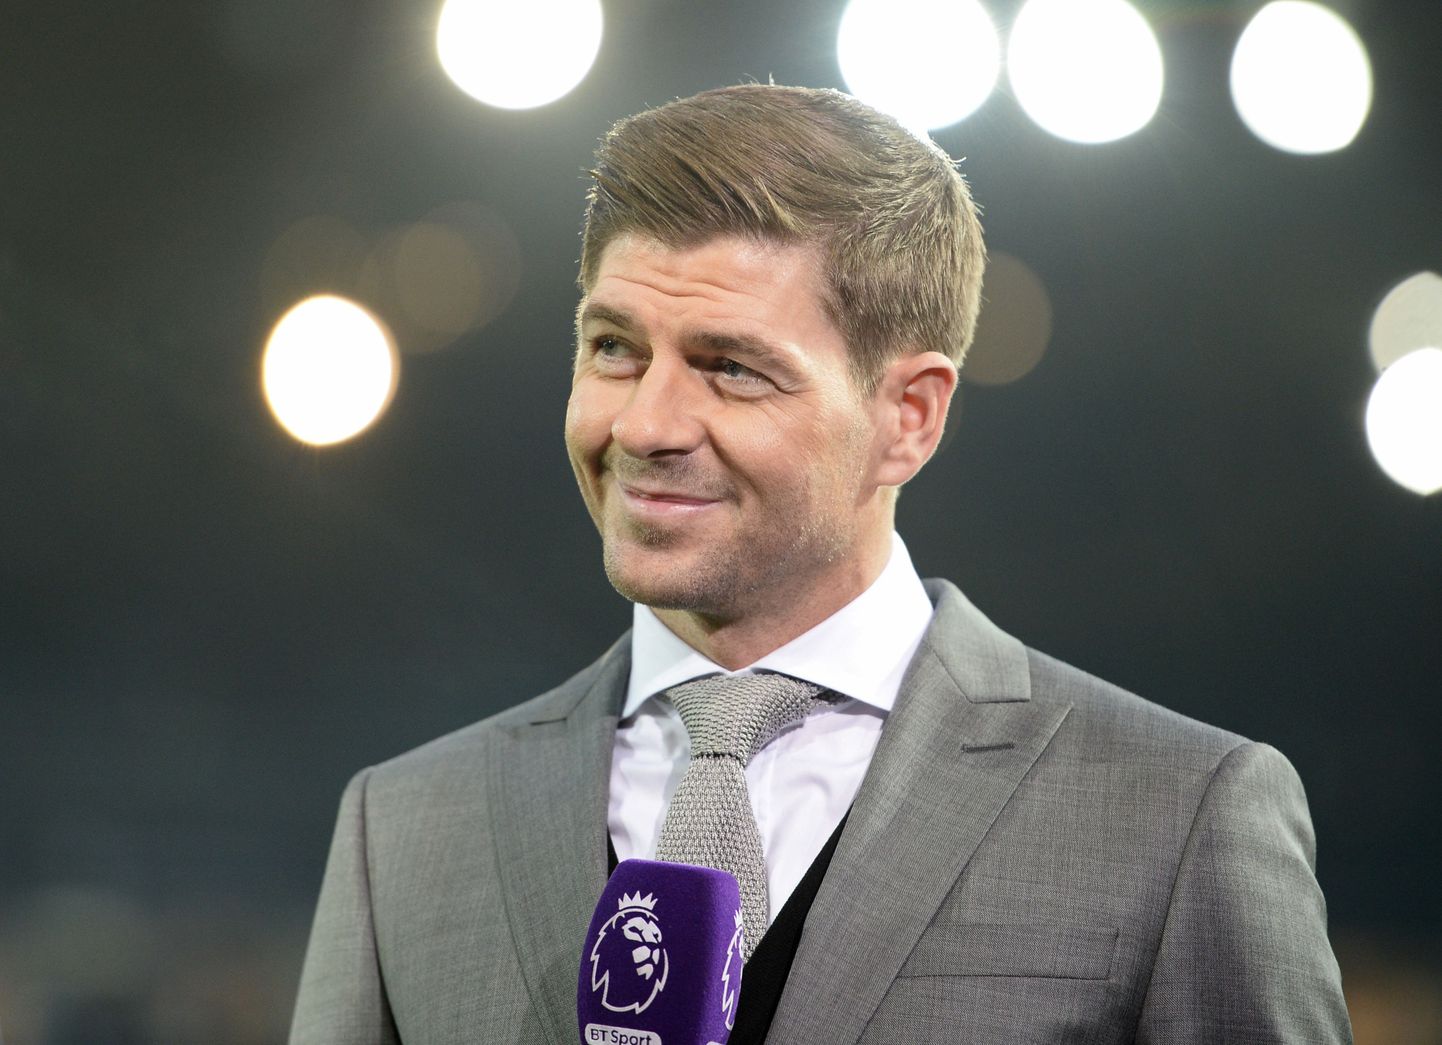 Former Liverpool and England captain Steven Gerrard, seen working for television ahead of the English Premier League football match between West Bromwich Albion and Manchester United at The Hawthorns stadium in West Bromwich, central England, on December 17, 2016.
 / AFP PHOTO / Oli SCARFF / RESTRICTED TO EDITORIAL USE. No use with unauthorized audio, video, data, fixture lists, club/league logos or 'live' services. Online in-match use limited to 75 images, no video emulation. No use in betting, games or single club/league/player publications.  /